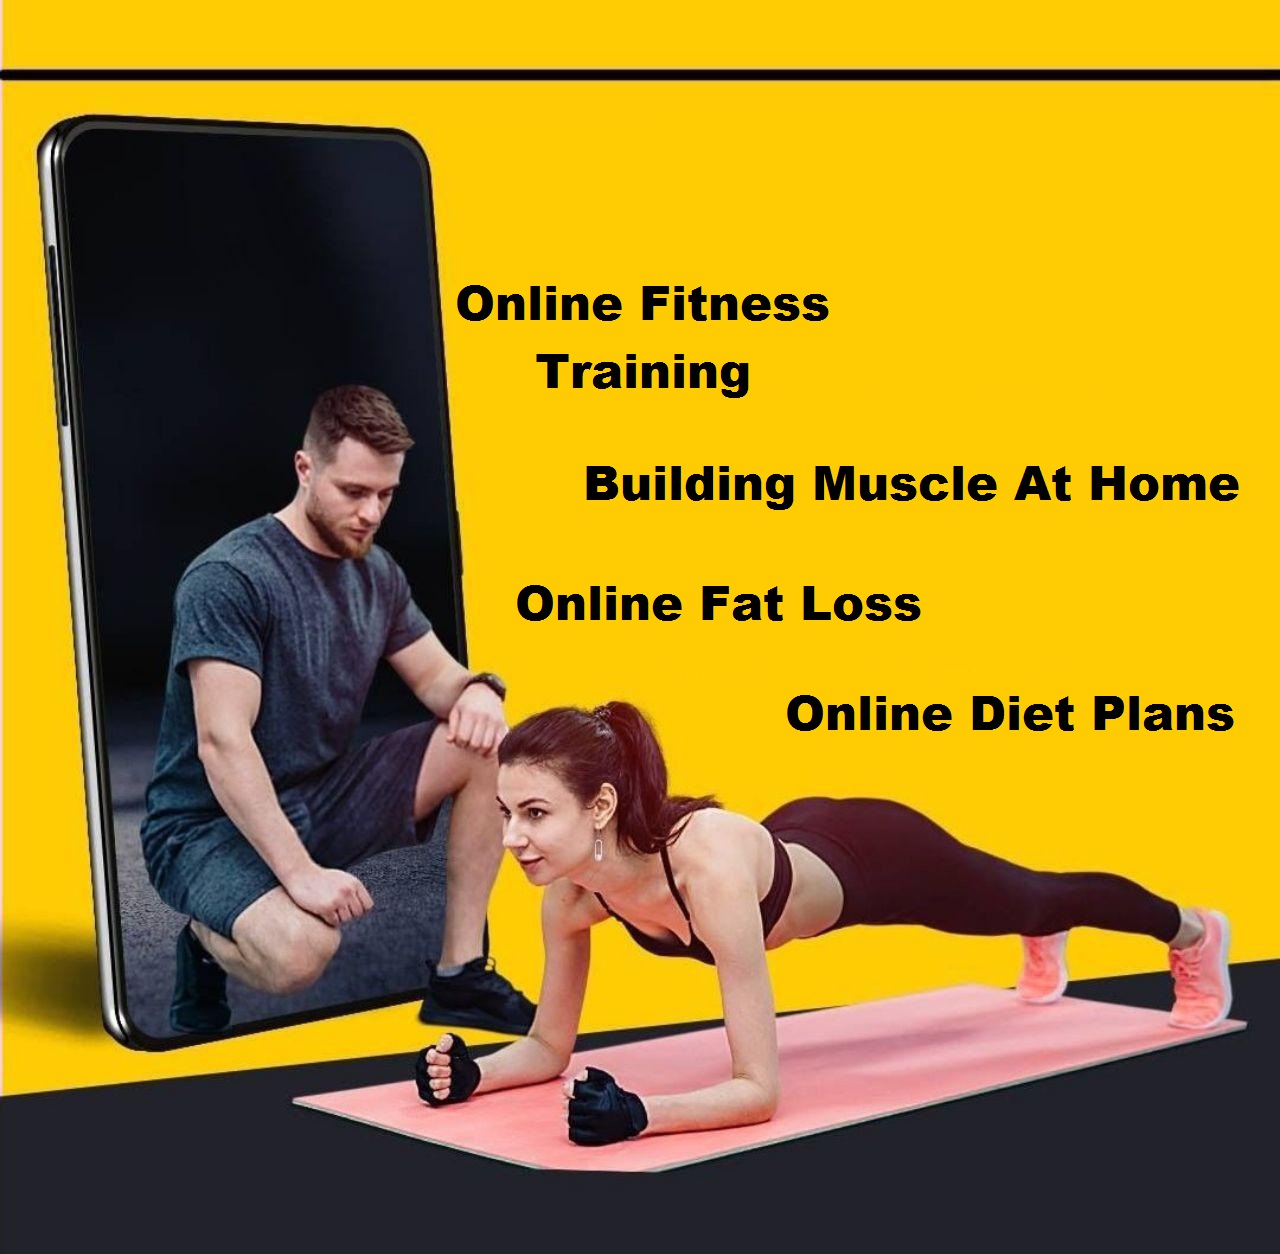 Fitness Training Online Courses: Guide to Ultimate Body Success